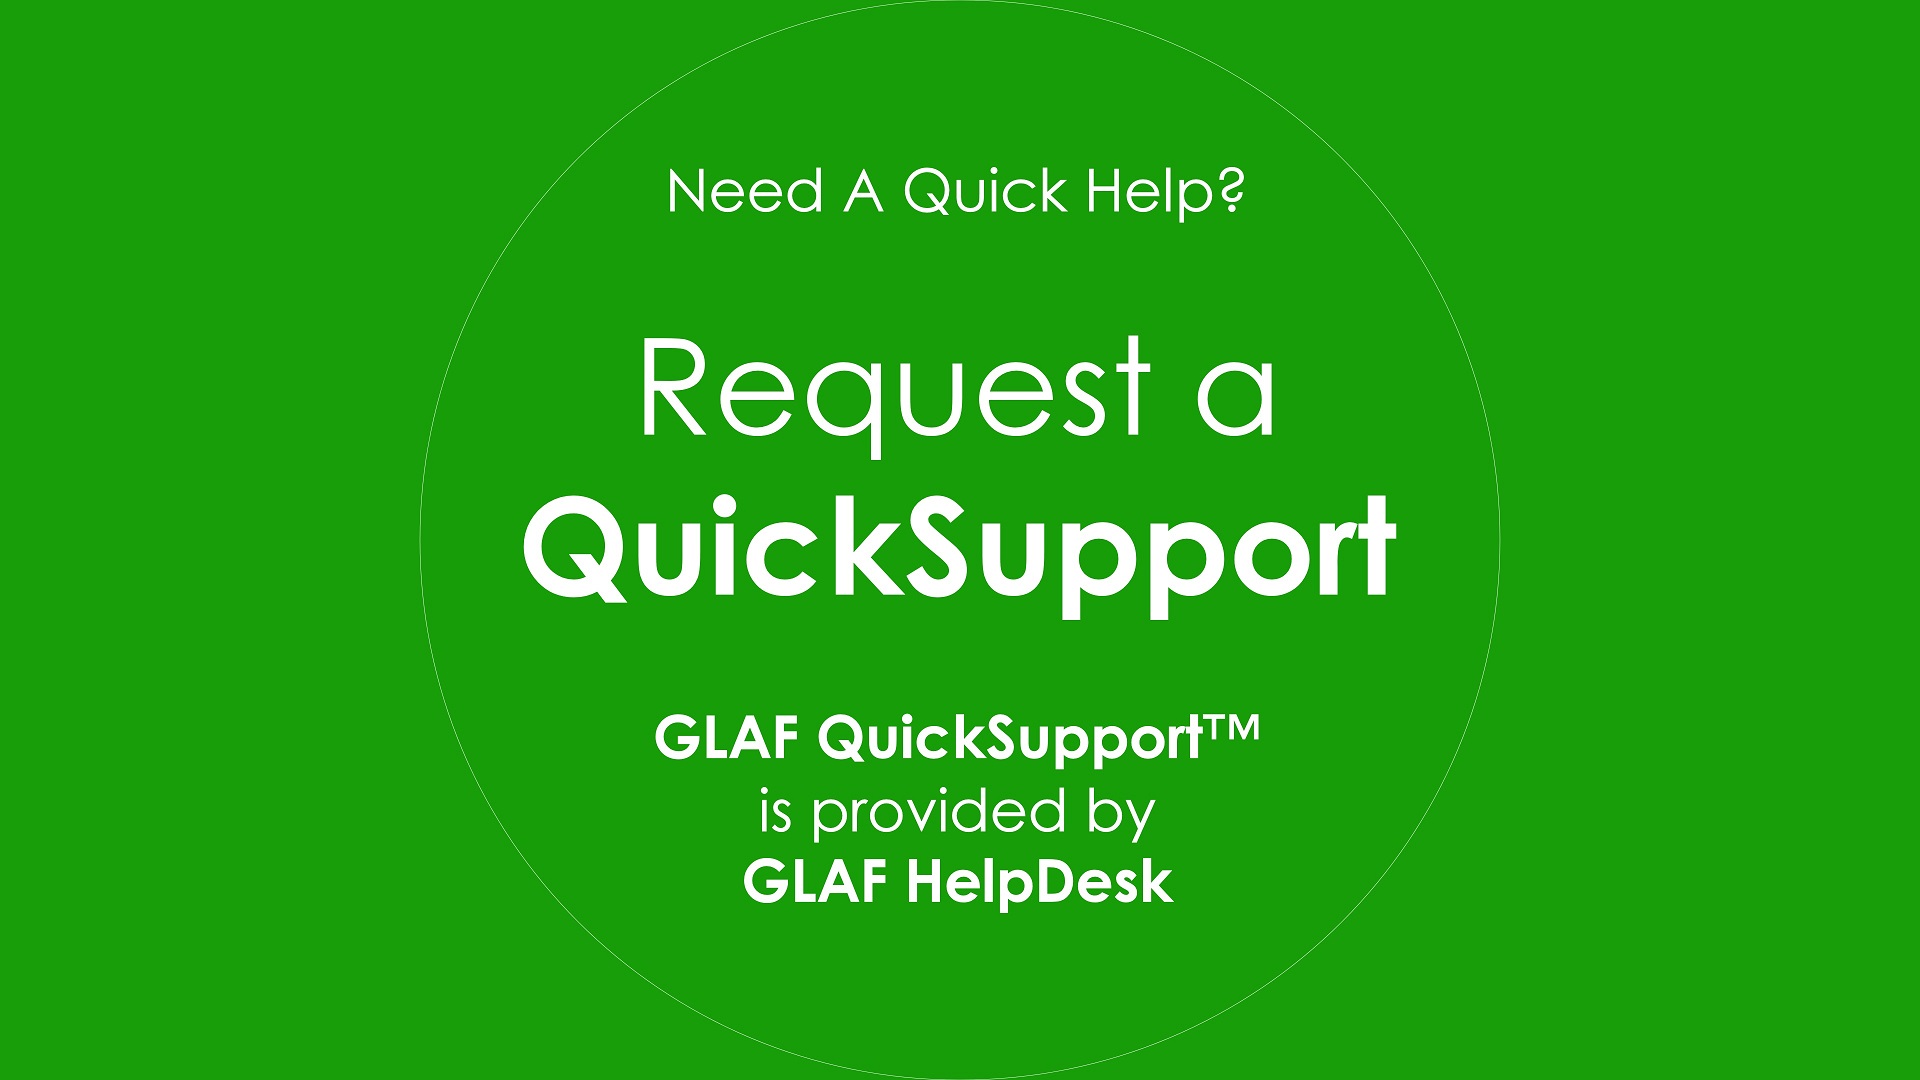 Need A Quick Help? Request A QuickSupport!